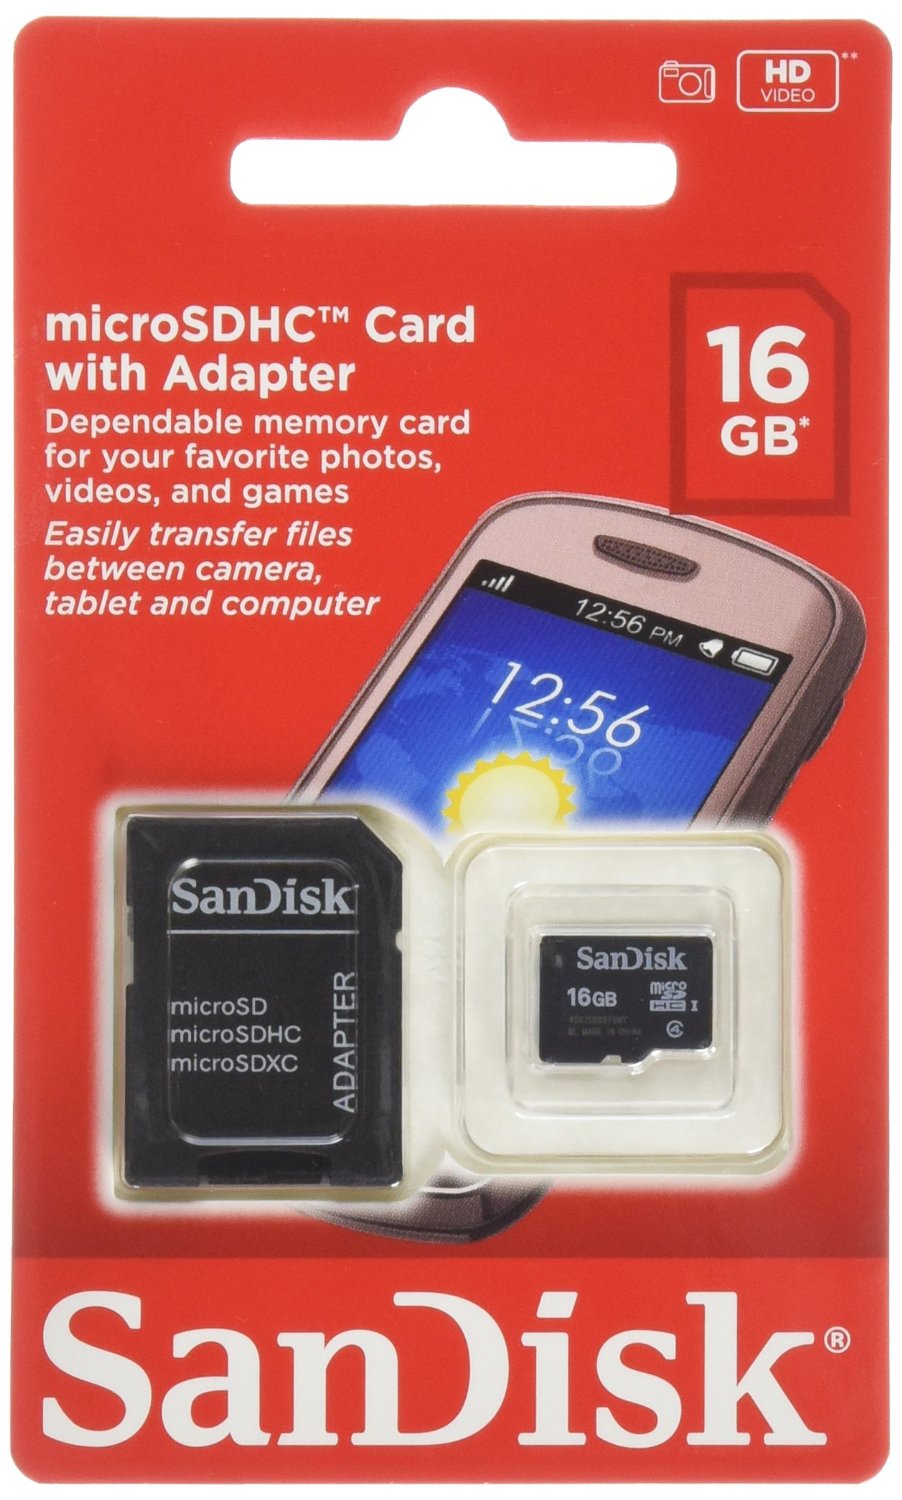 SanDisk 16GB Mobile MicroSDHC Class 4 Flash Memory Card With Adapter